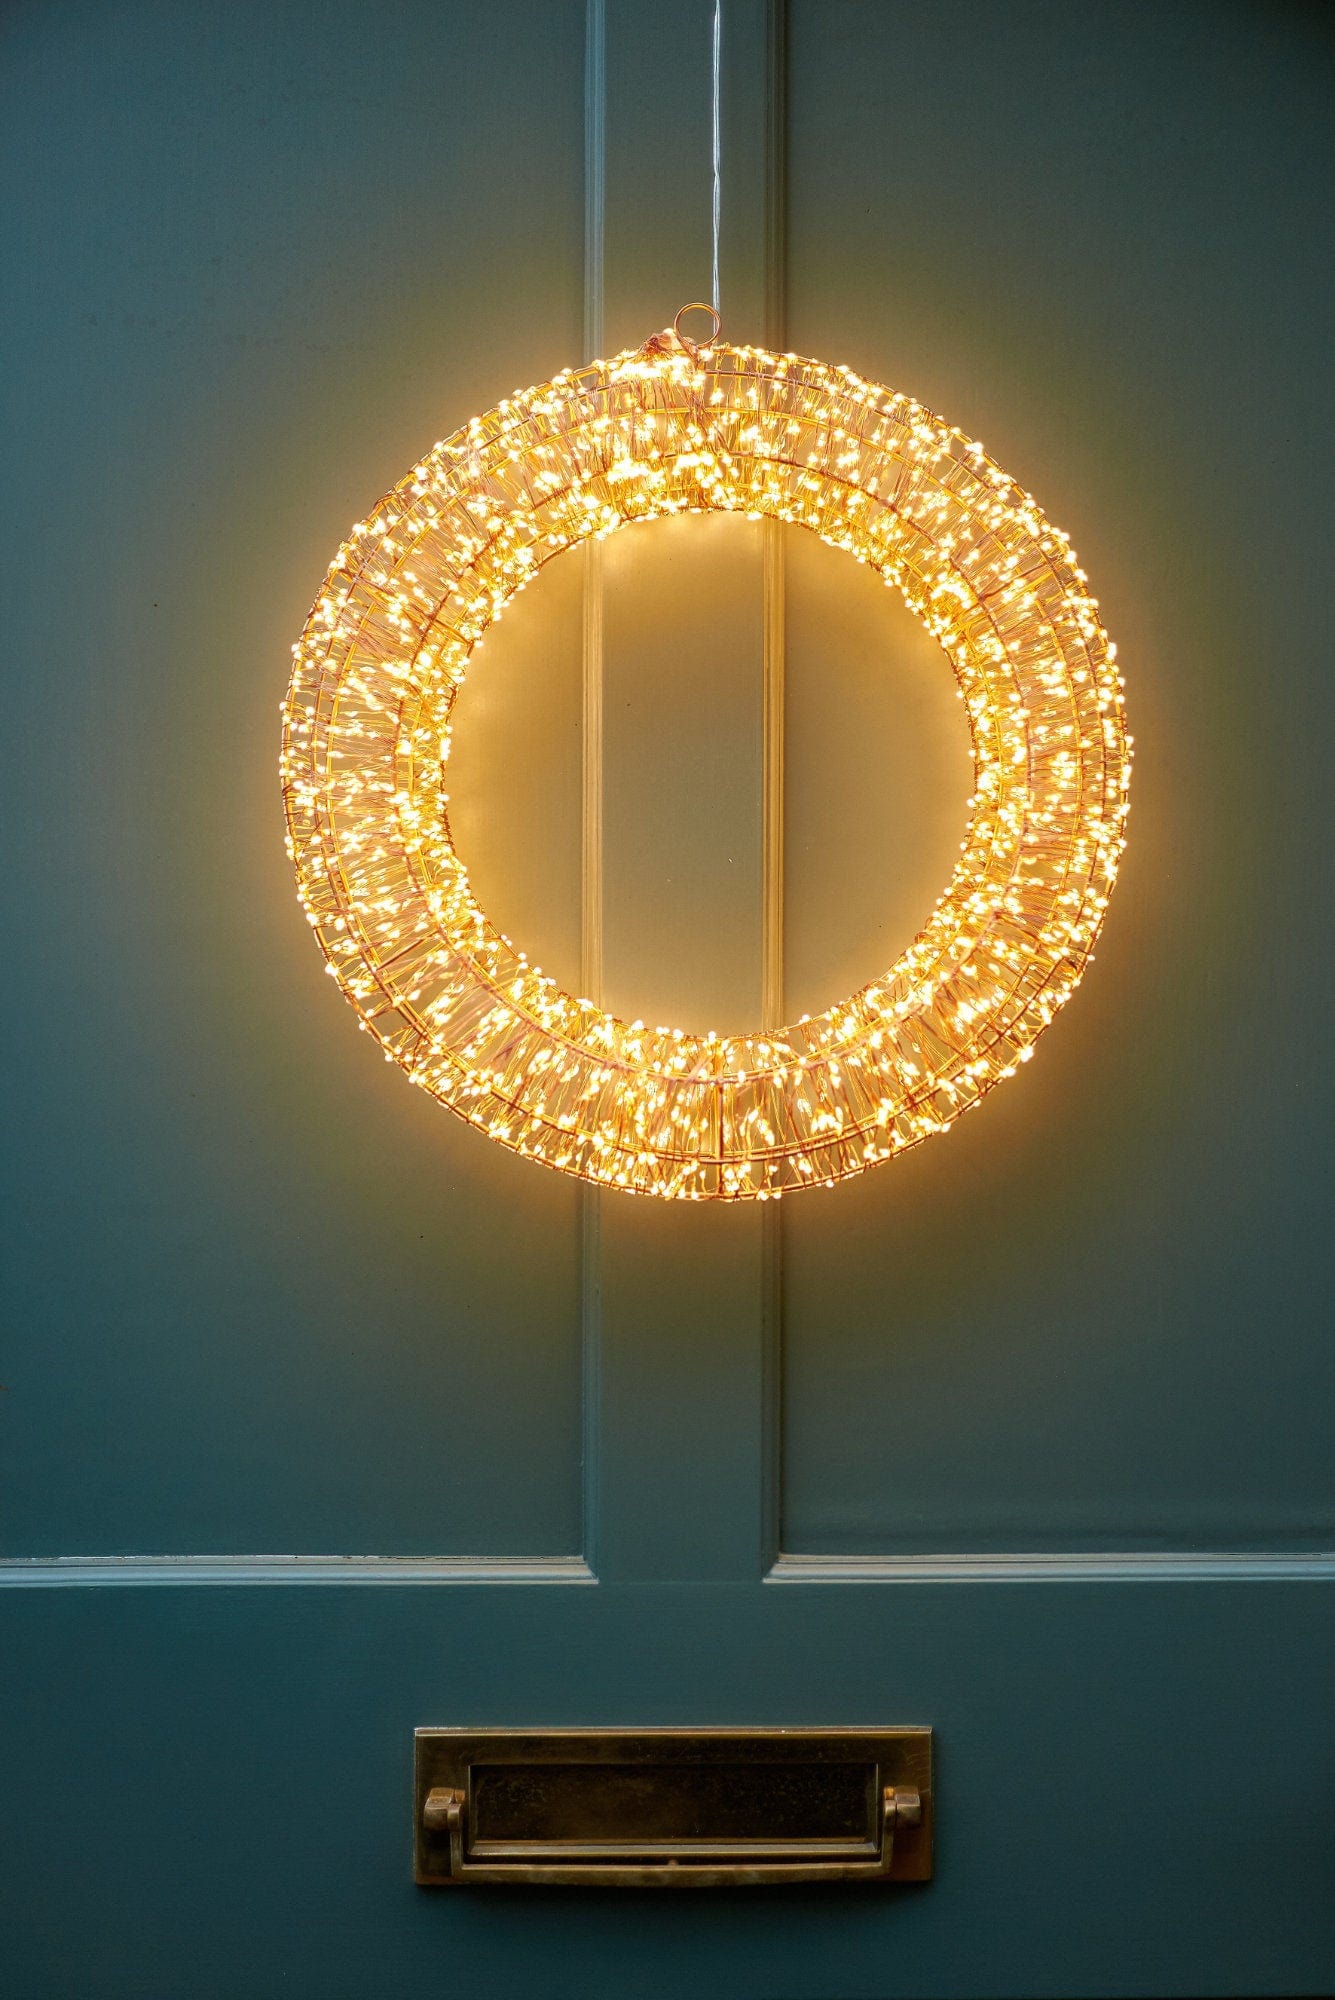 Galaxy 40cm Wreath Copper, Mains Powered 1800 LEDs